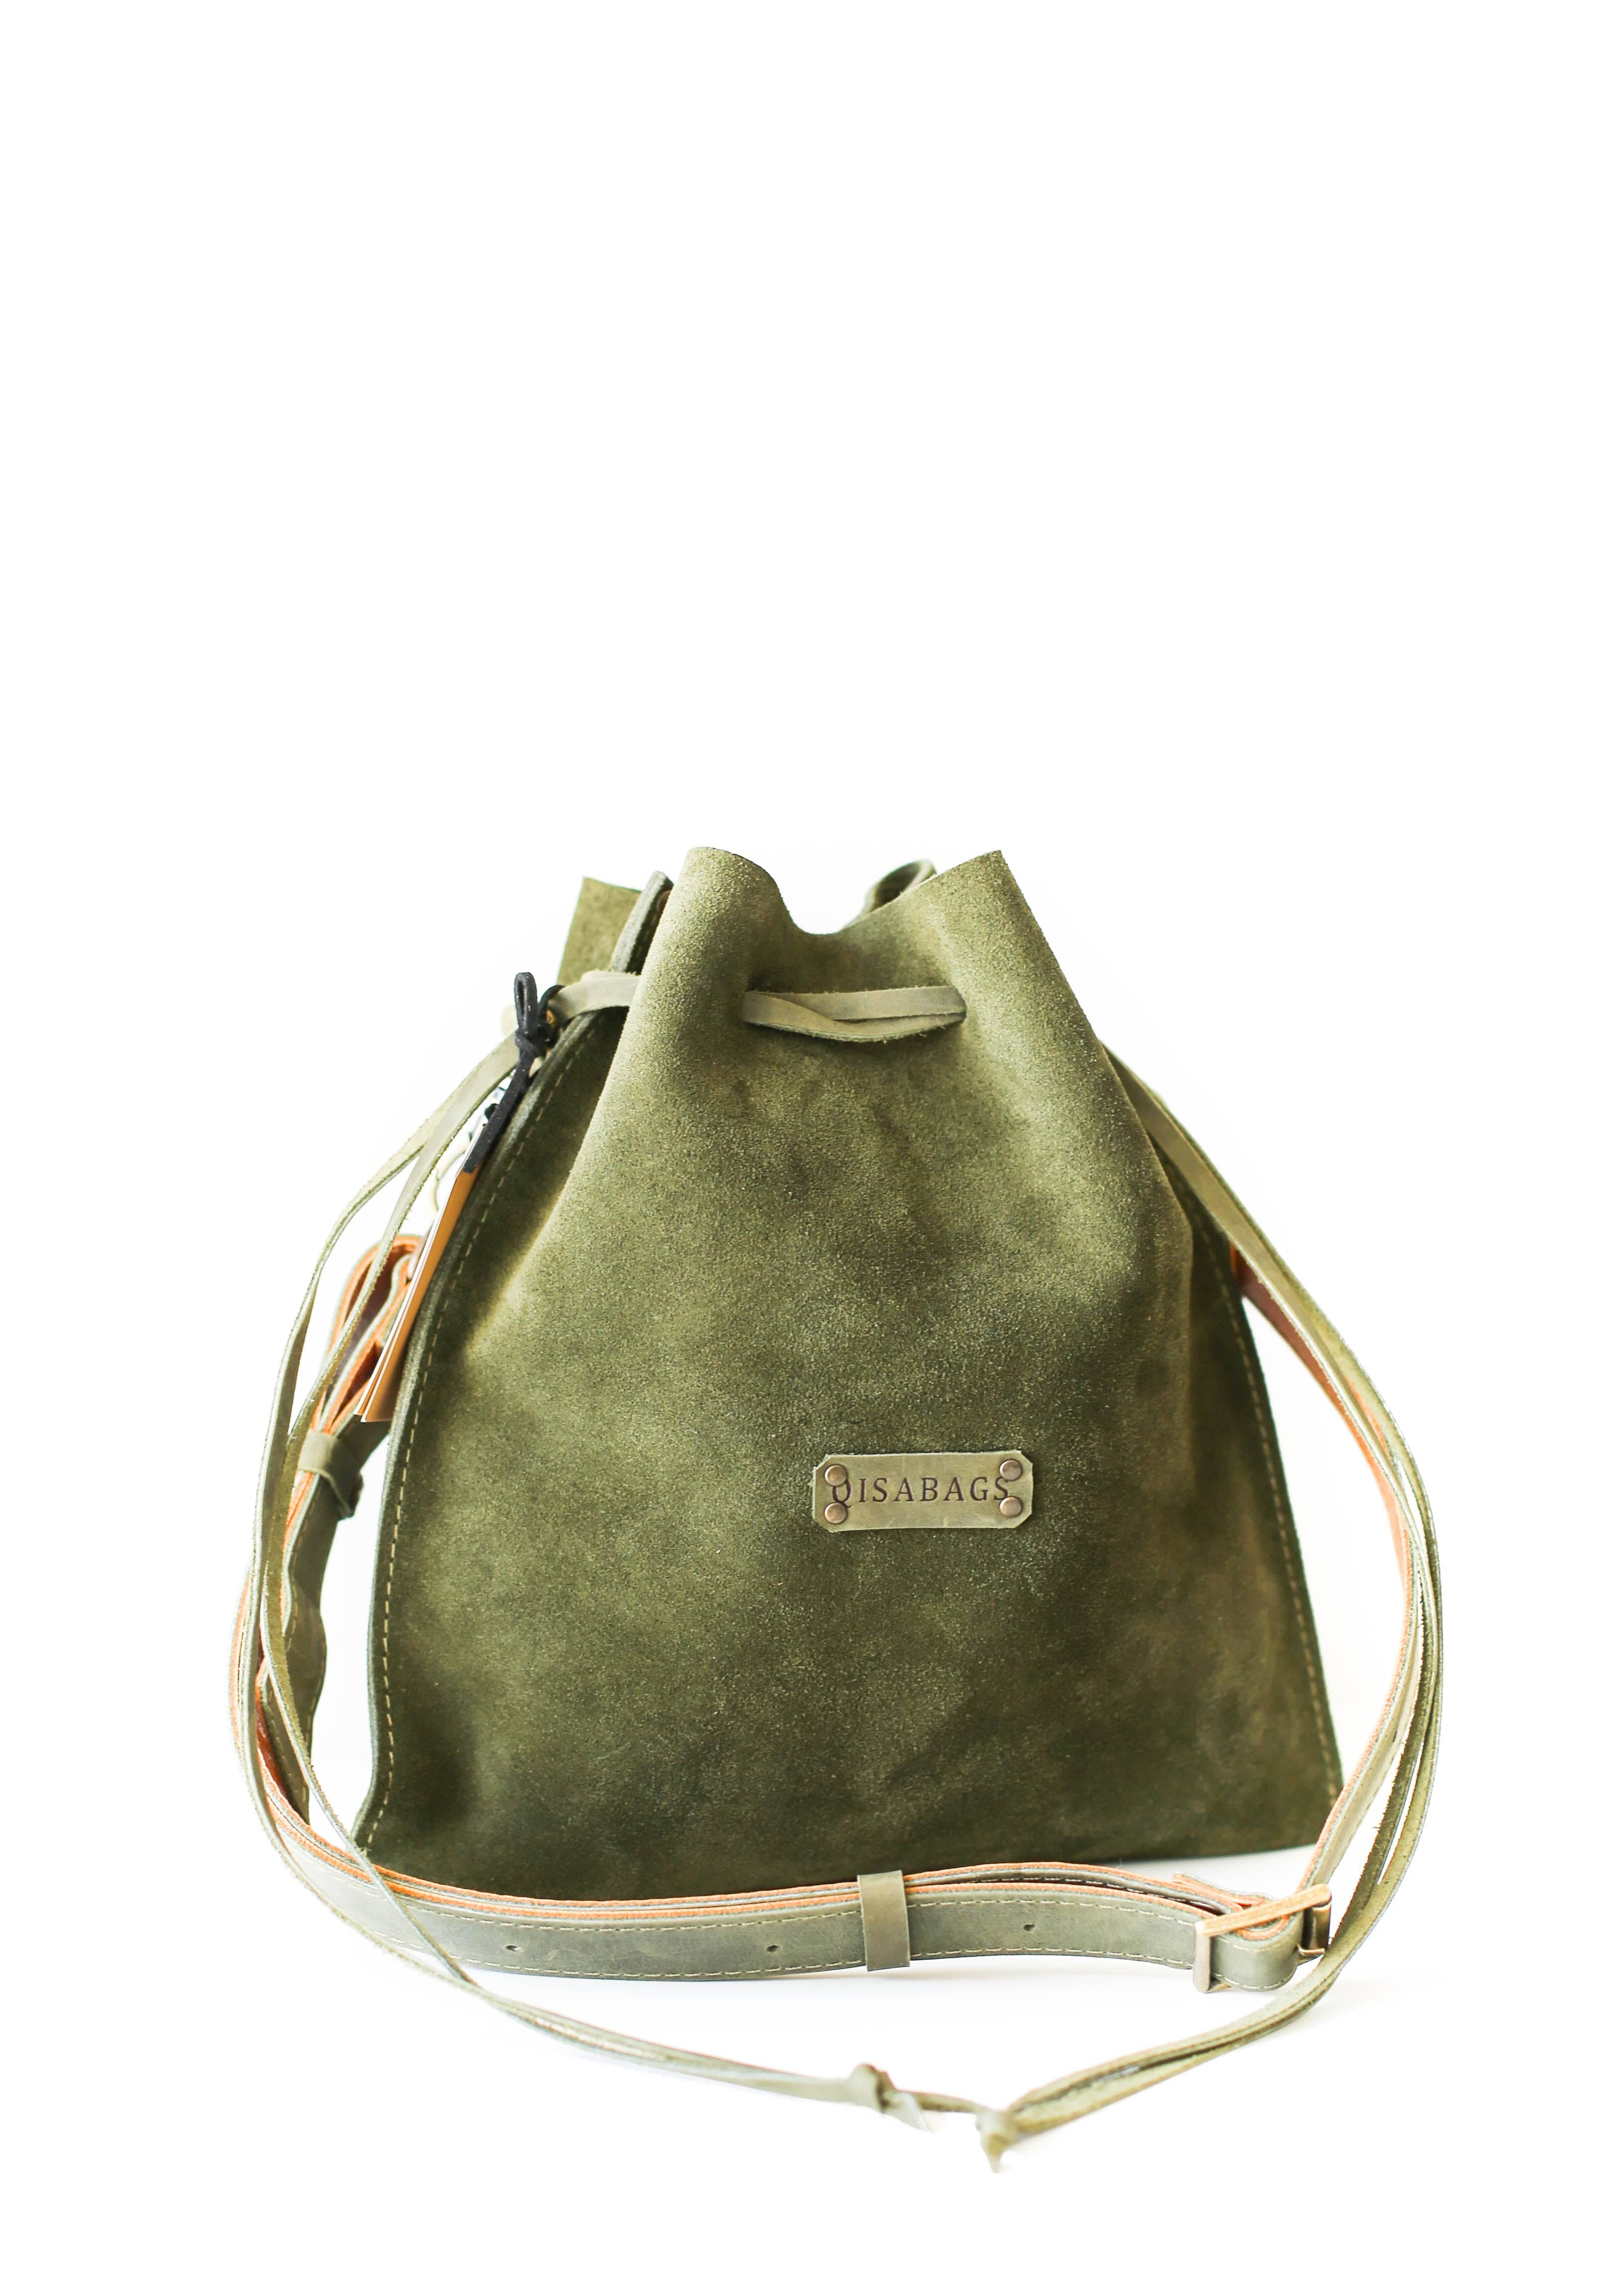 Large TOTE leather bag in moss GREEN . Slouch leather bag. Boho bag. L –  Handmade suede bags by Good Times Barcelona